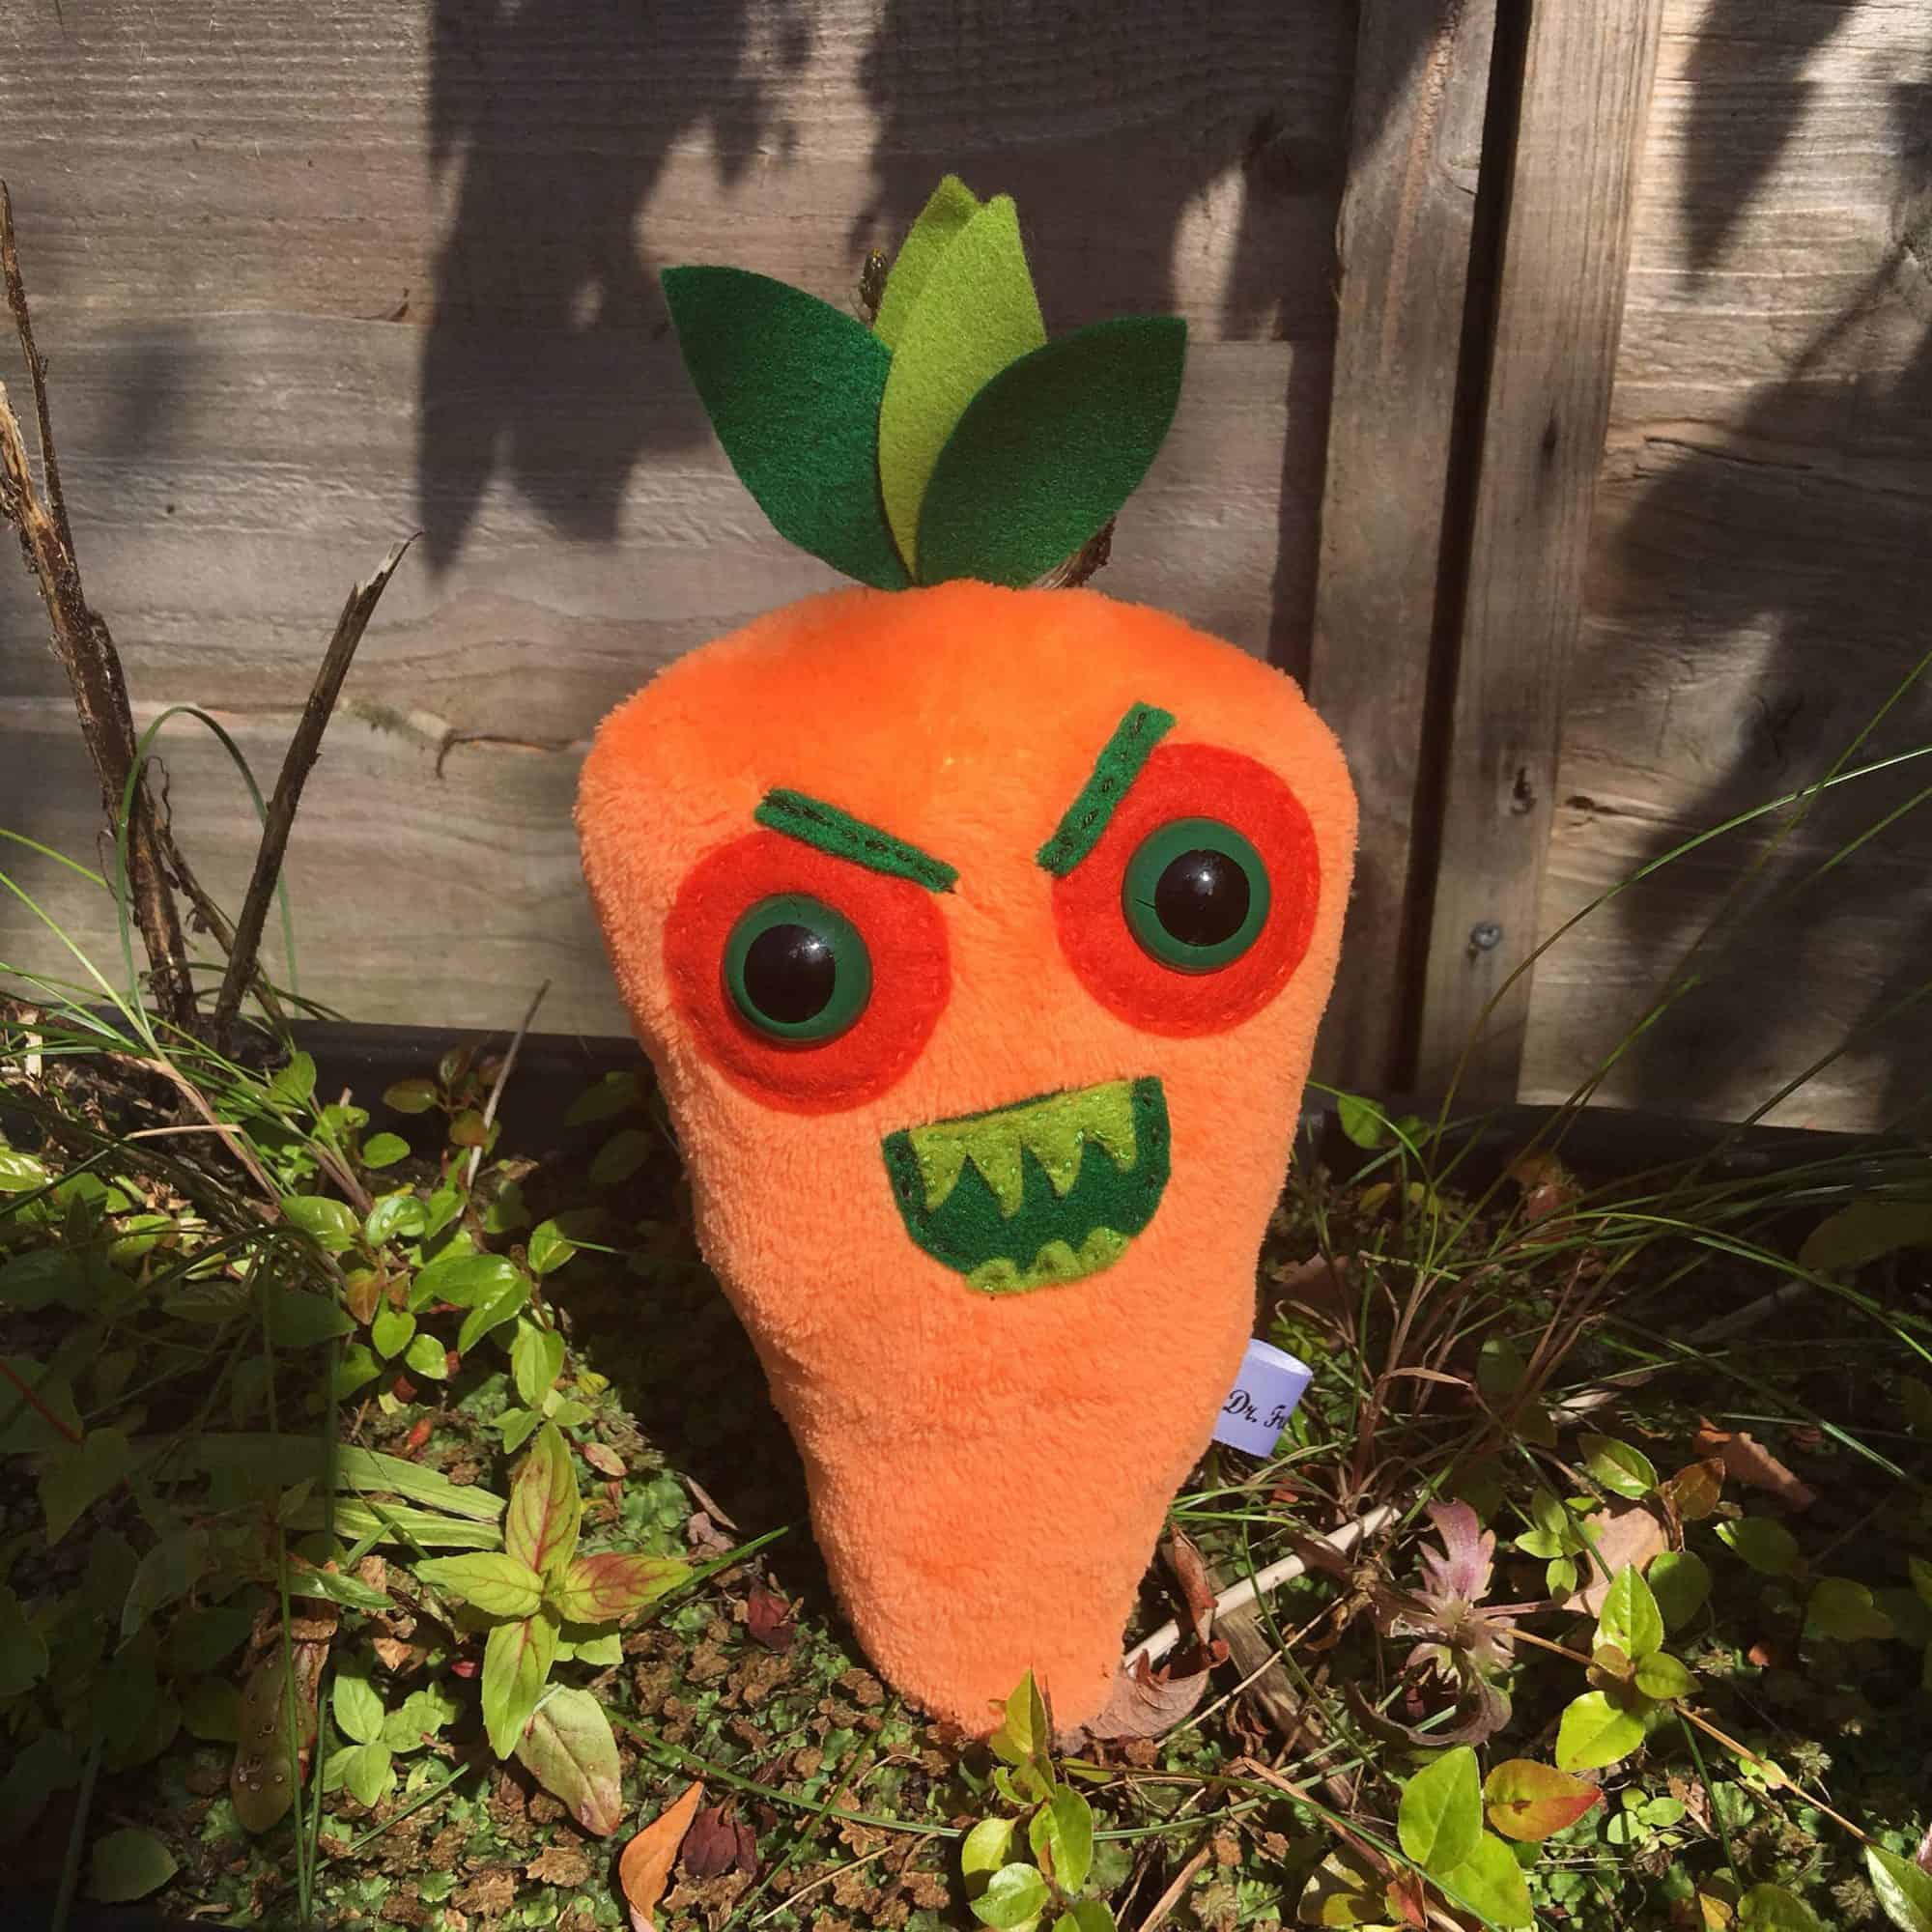 You can buy theKiller Carrot Plush Toy here